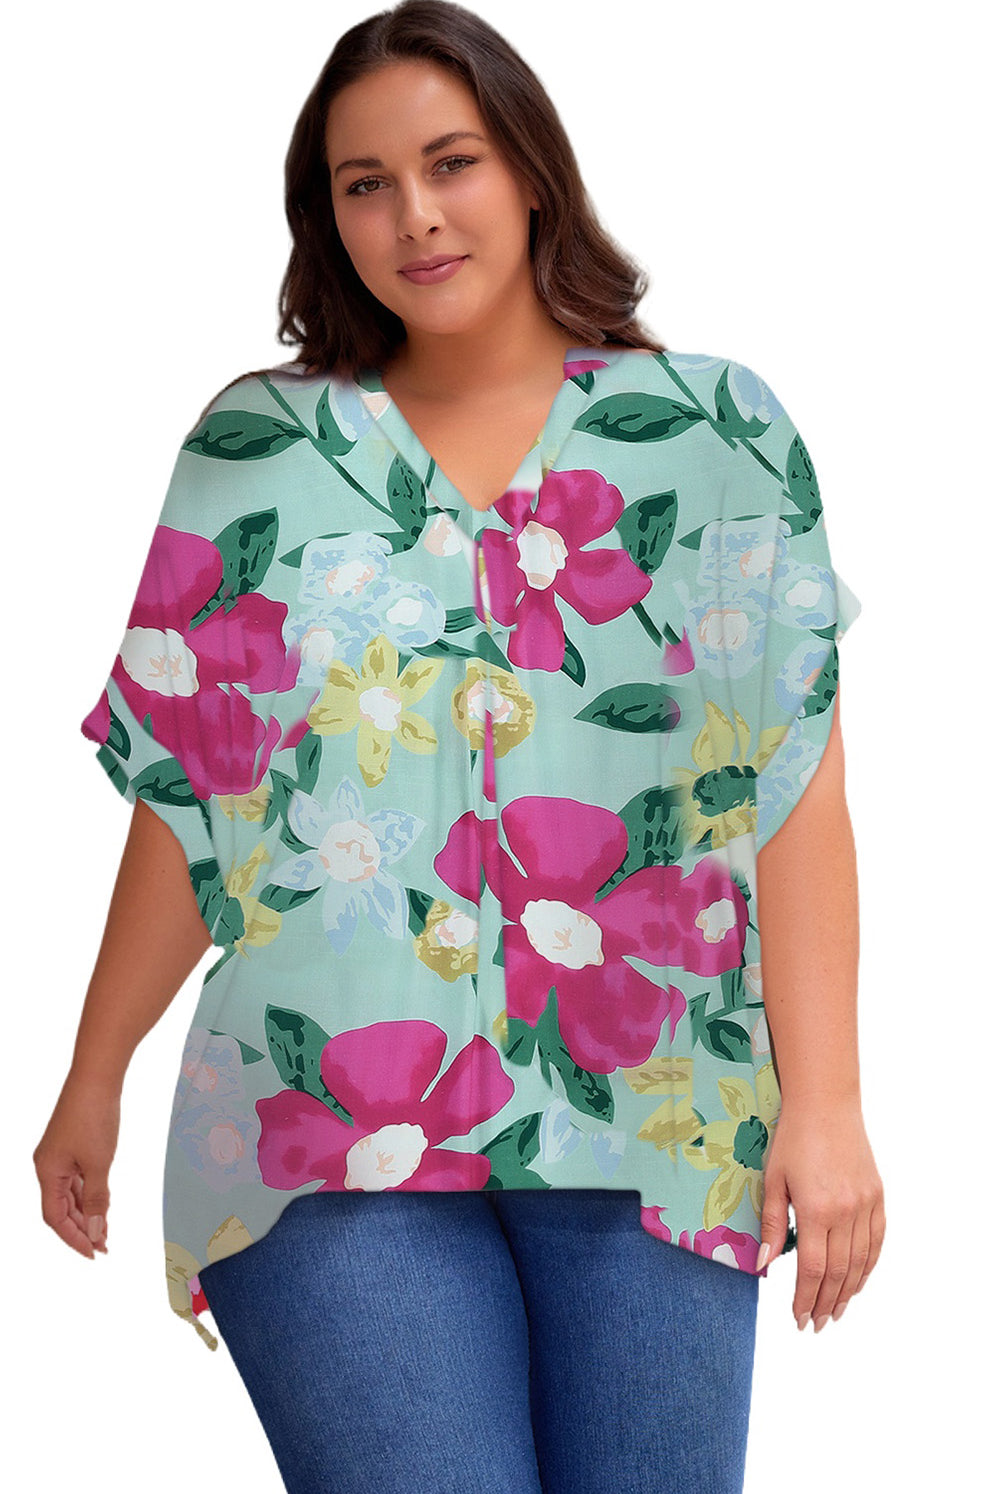 Dark Gray Plus Size Printed Notched Neck Half Sleeve Top Tops